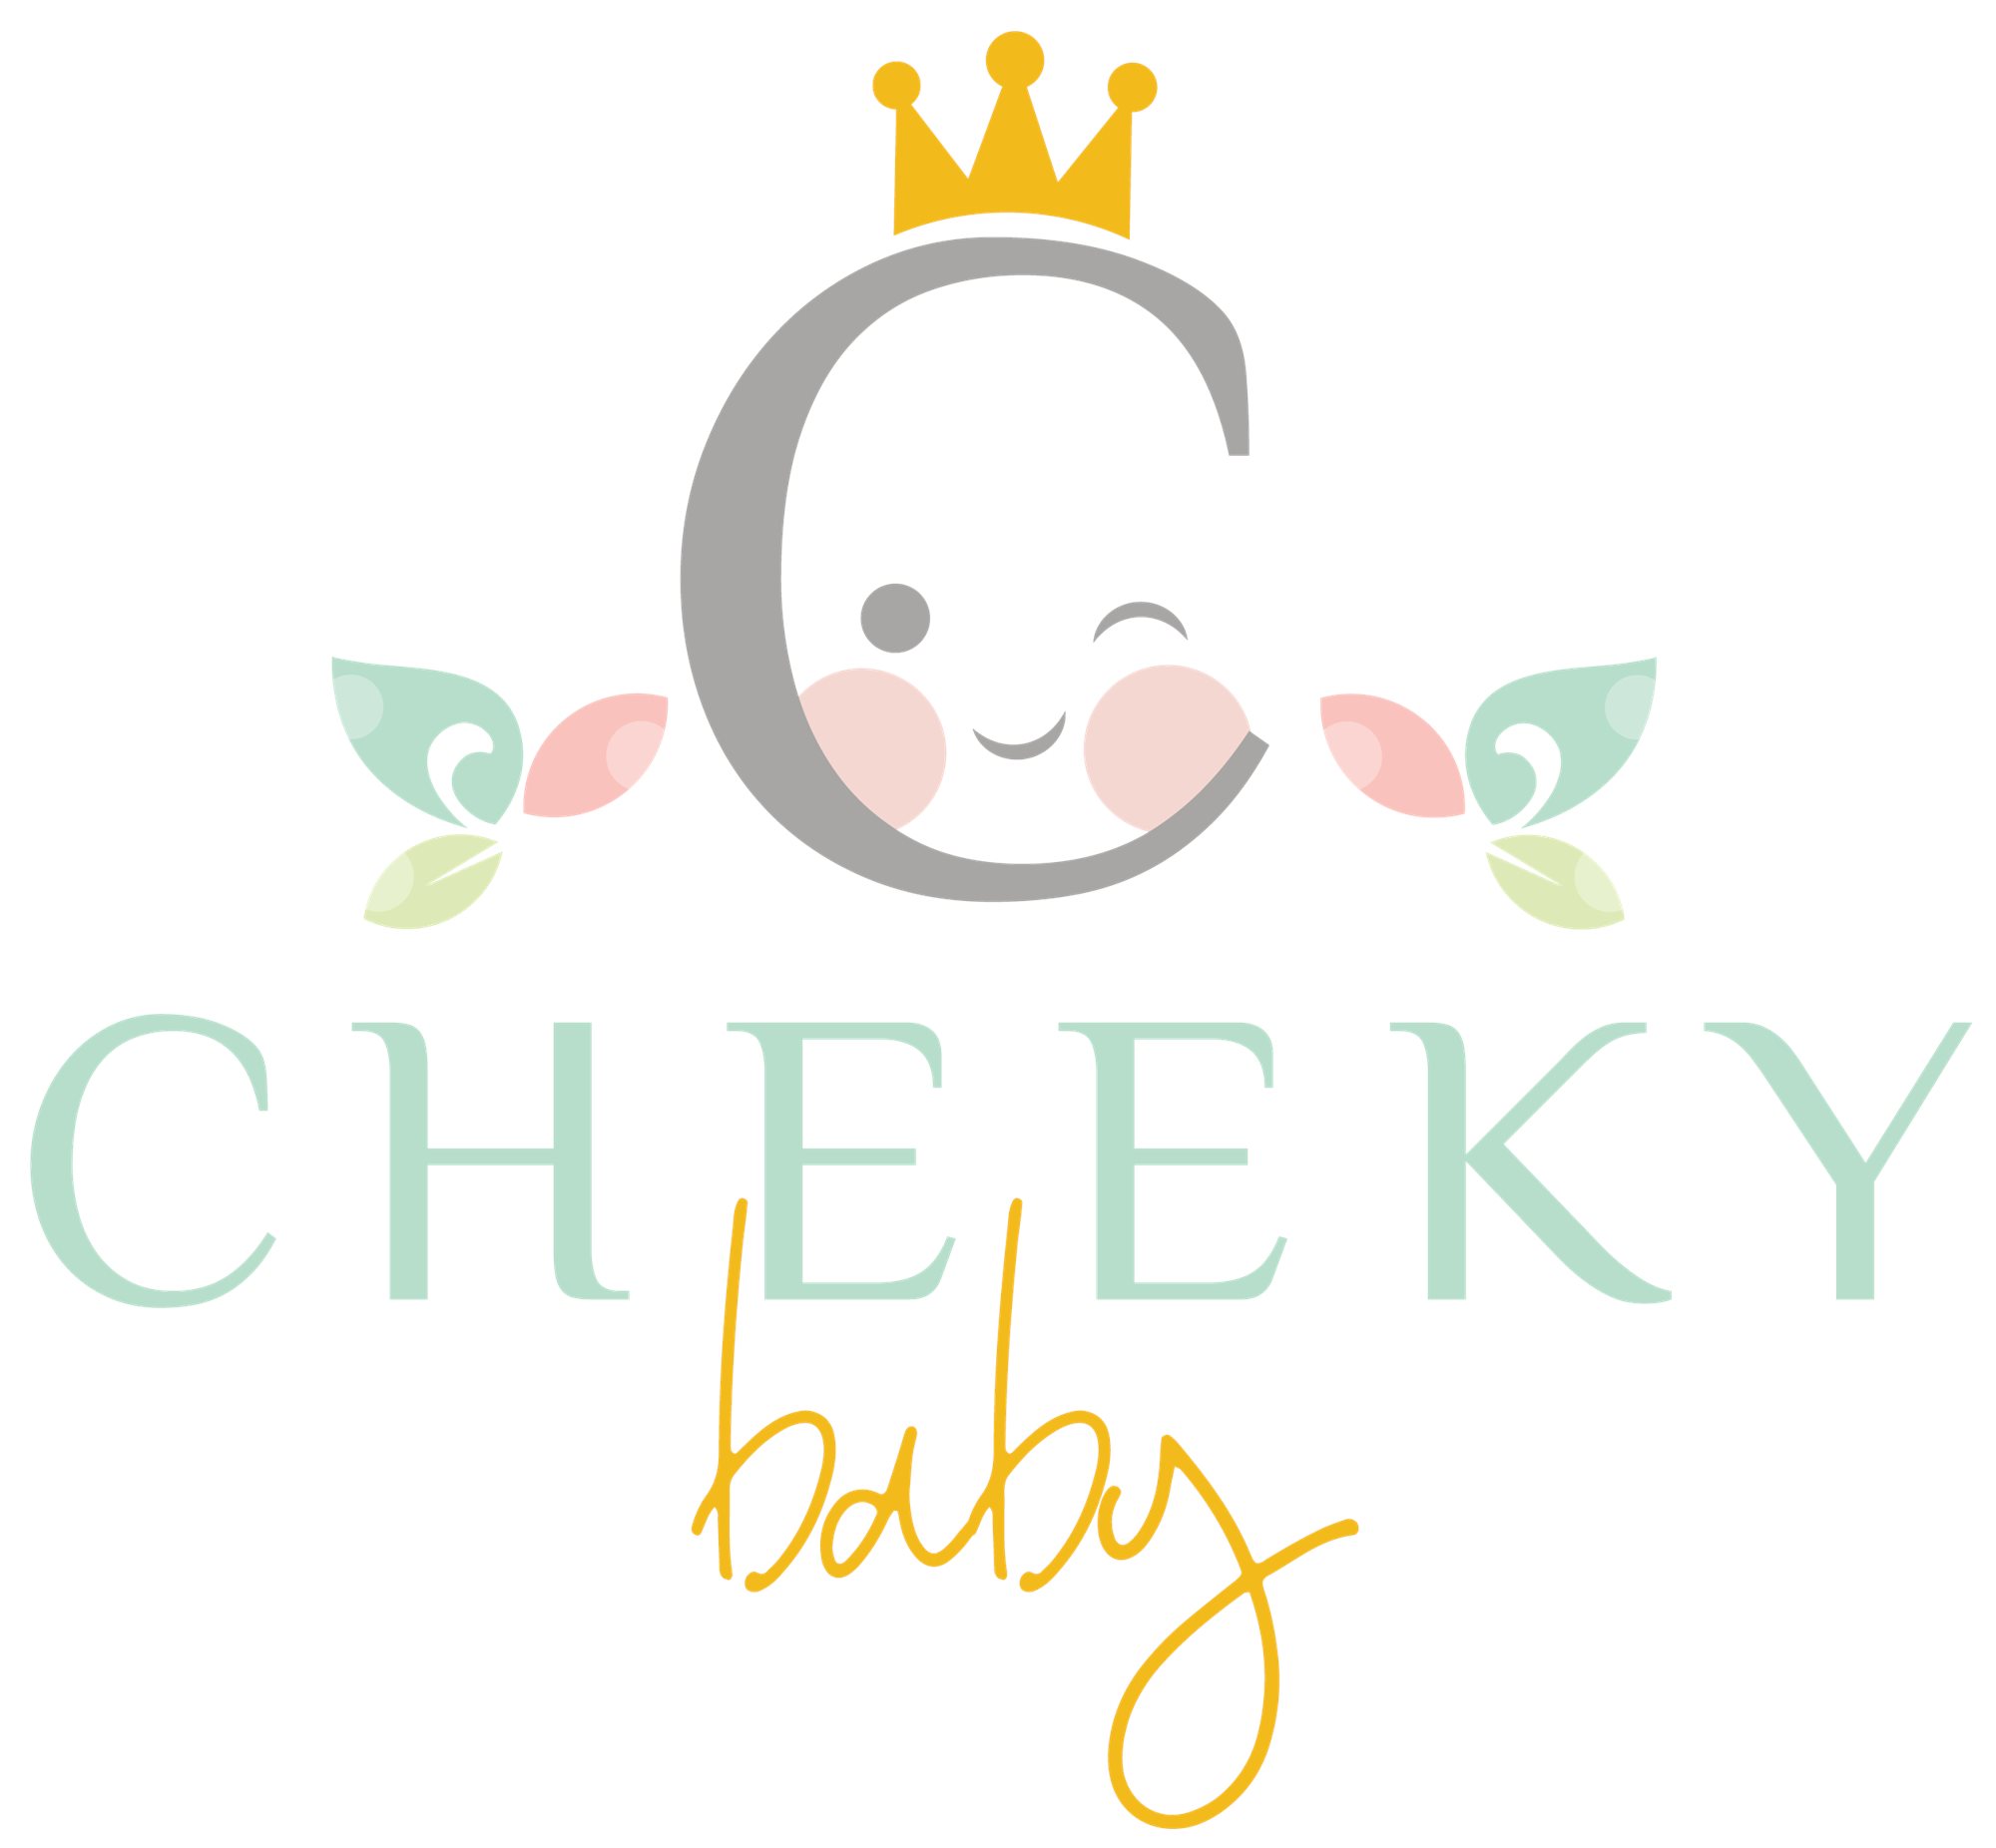 In Partnership with cheekybabyboutique.com